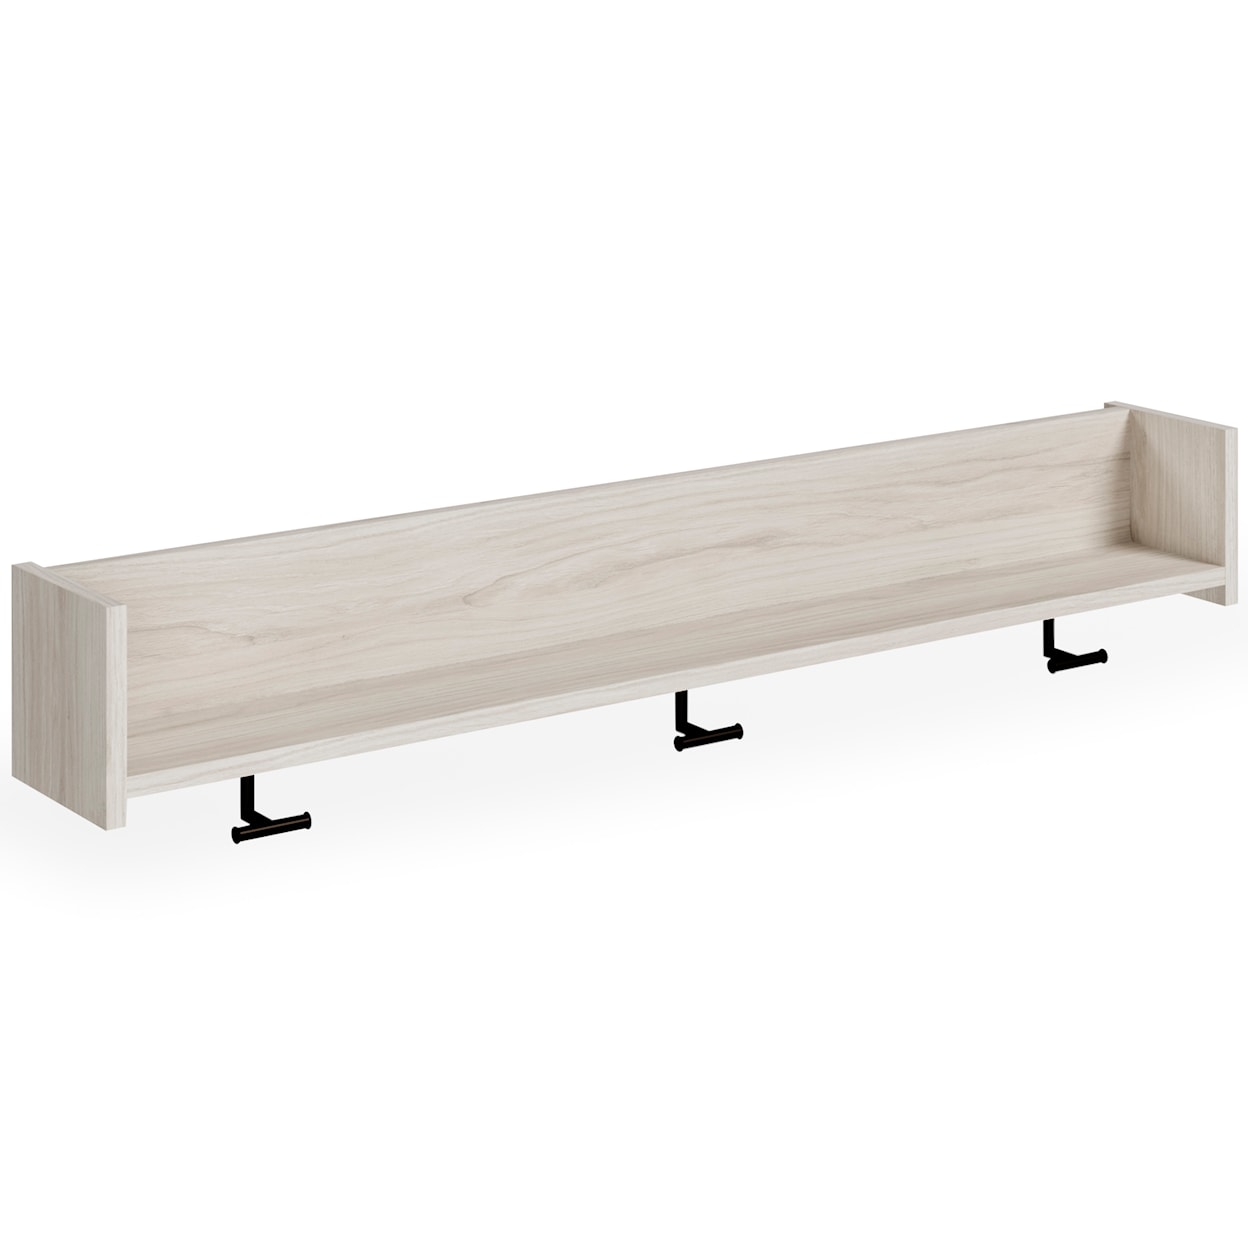 Signature Design Socalle Wall Mounted Coat Rack with Shelf